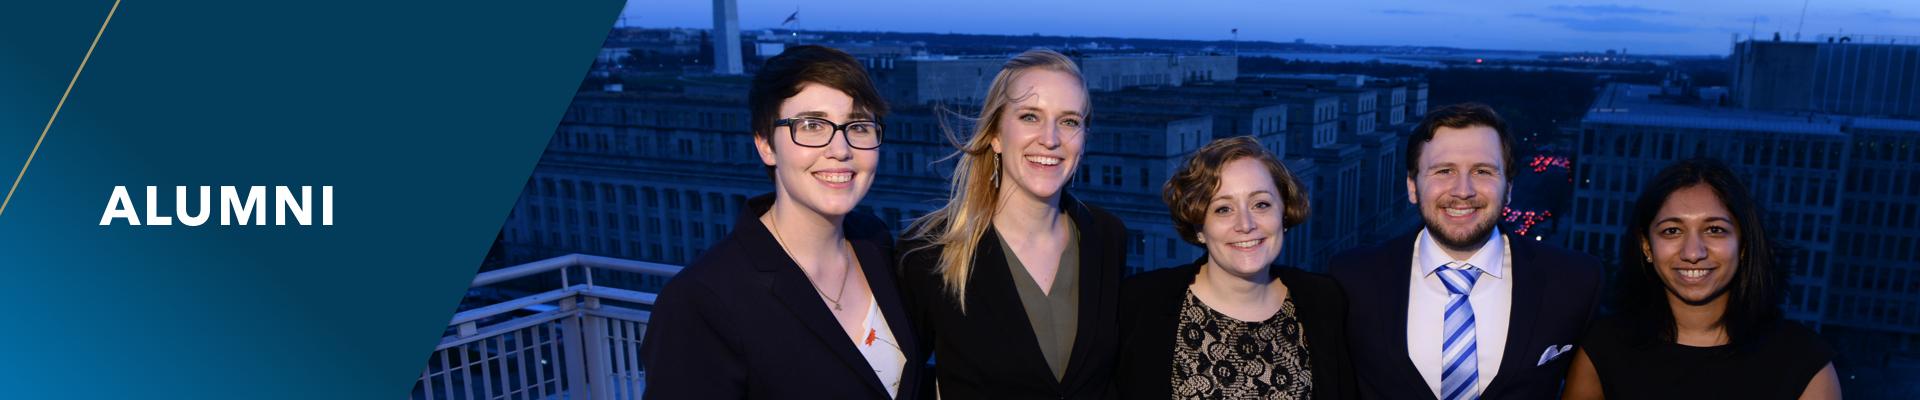 Alumni. A group of five students in business casual dress stand on the rooftop of a GW building at night with the DC skyline in the background